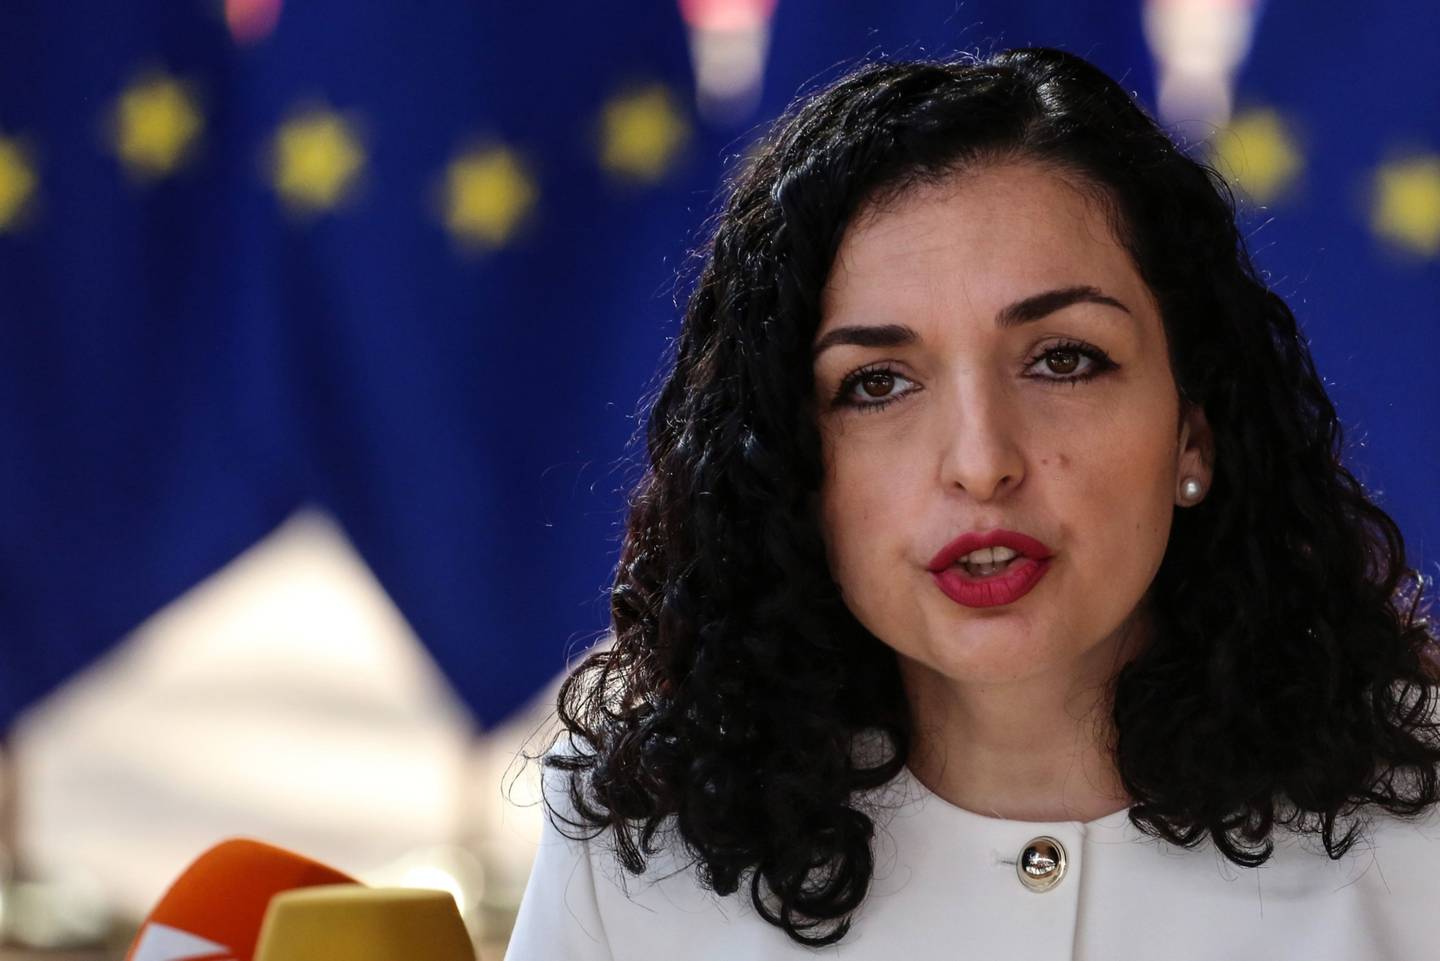 Vjosa Osmani, Kosovo's president, speaks to the media at the European Union (EU)-Western Balkans leaders summit at the European Council headquarters in Brussels, Belgium, on Thursday, June 23, 2022.